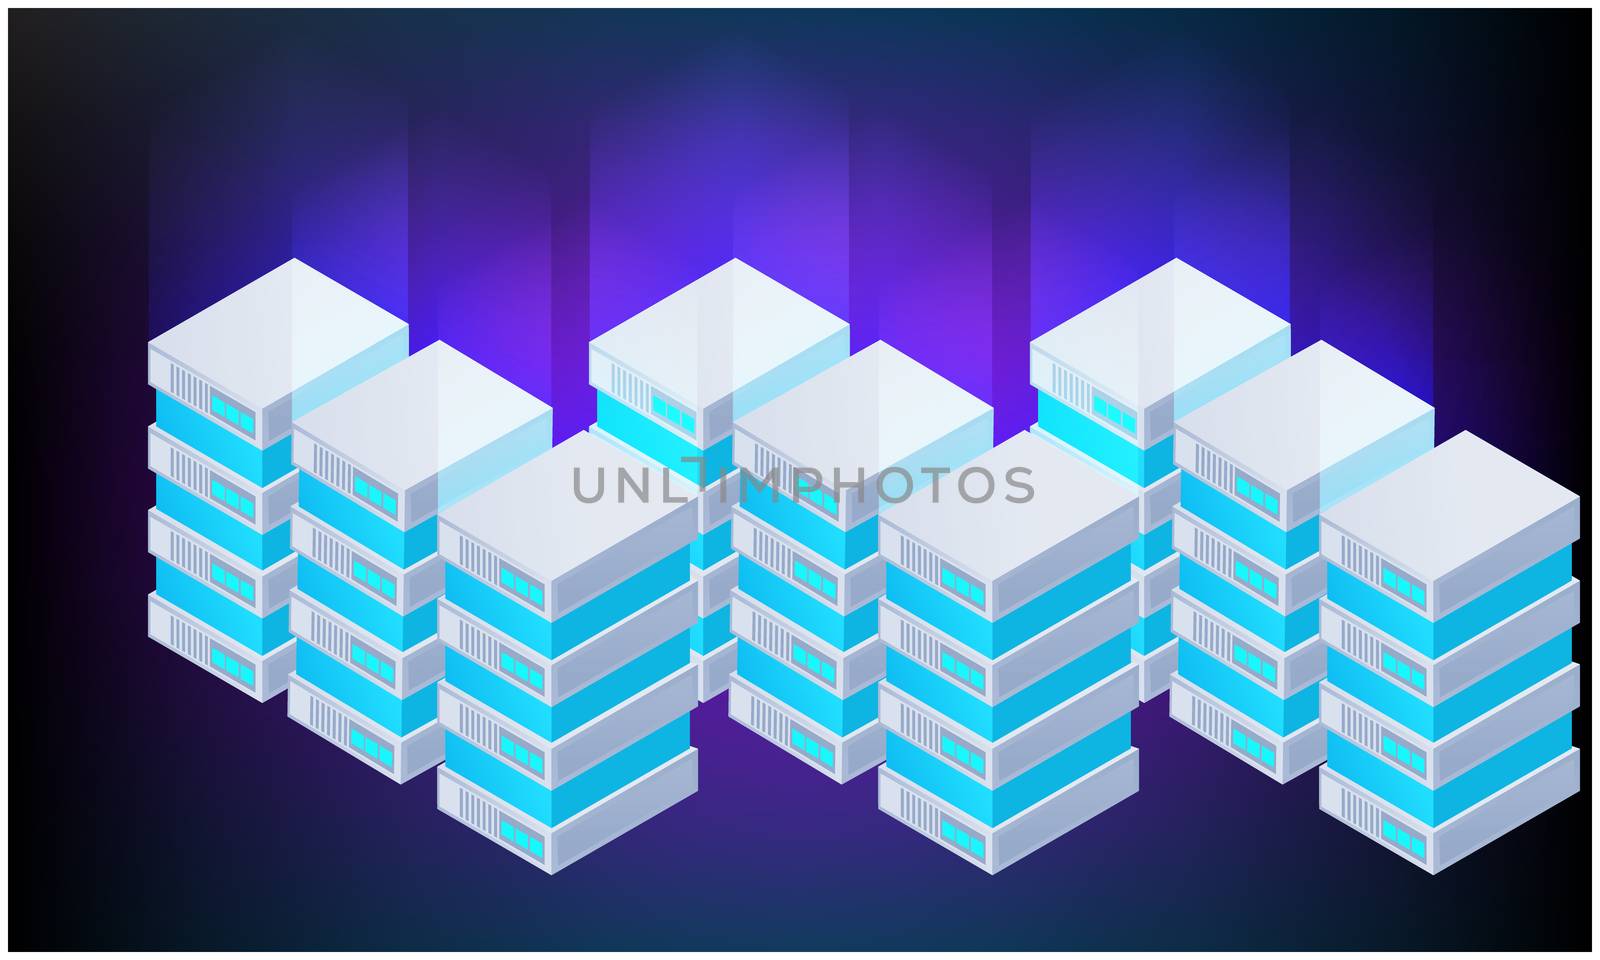 digital textile design of boxes on abstract backgrounds